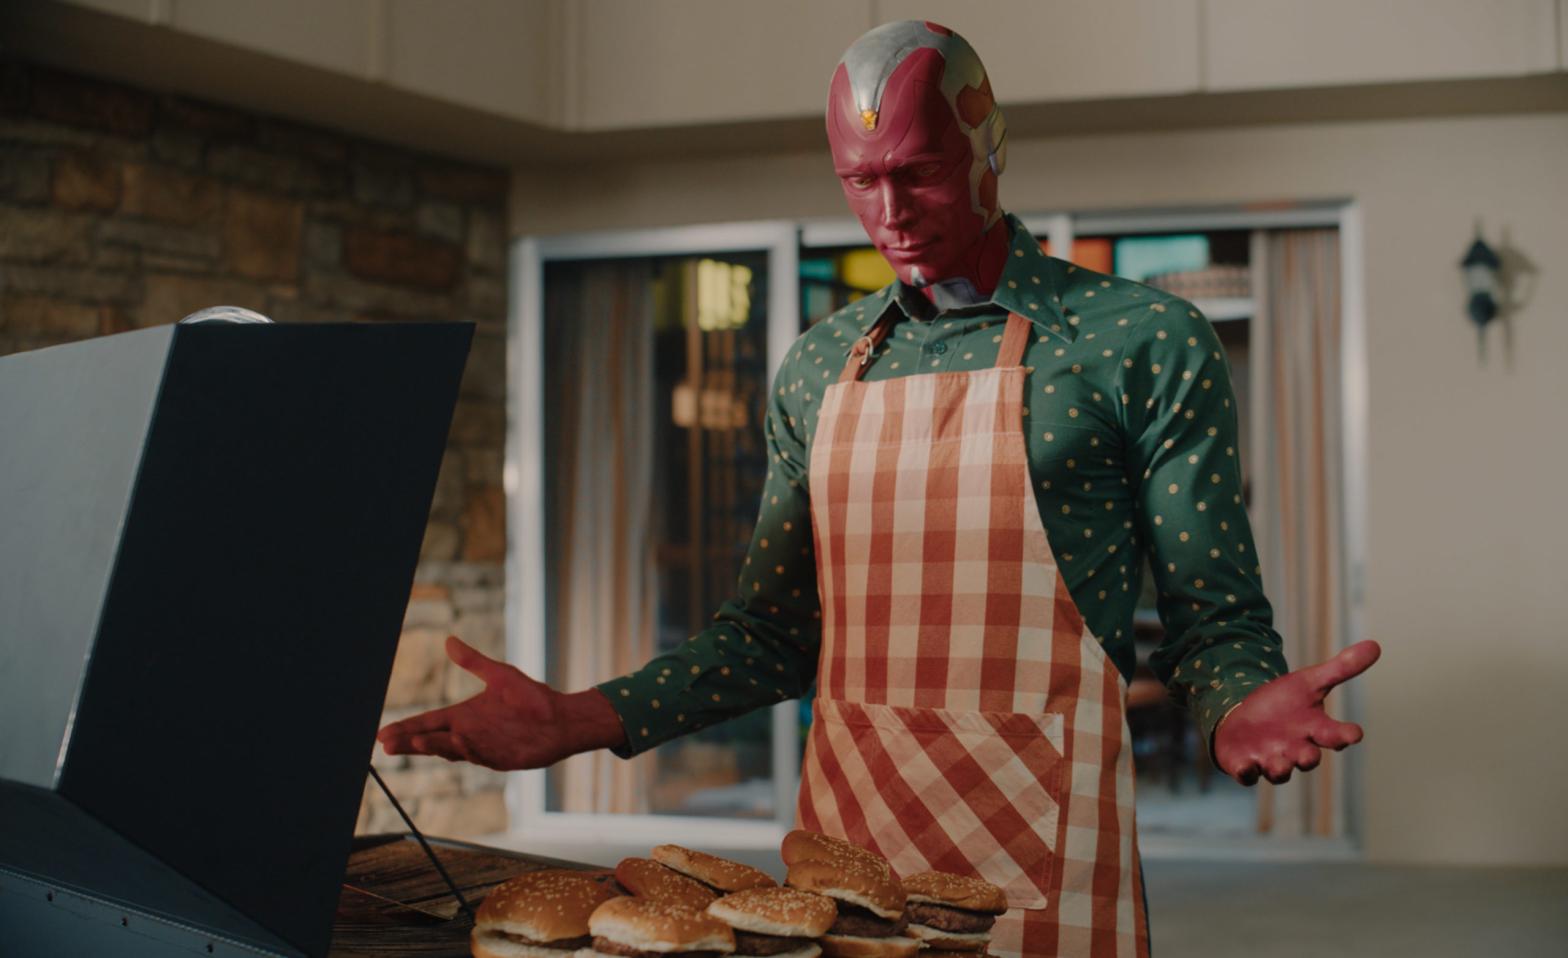 Vision grilling burgers, as dads are wont to do. (Image: Disney+/Marvel)